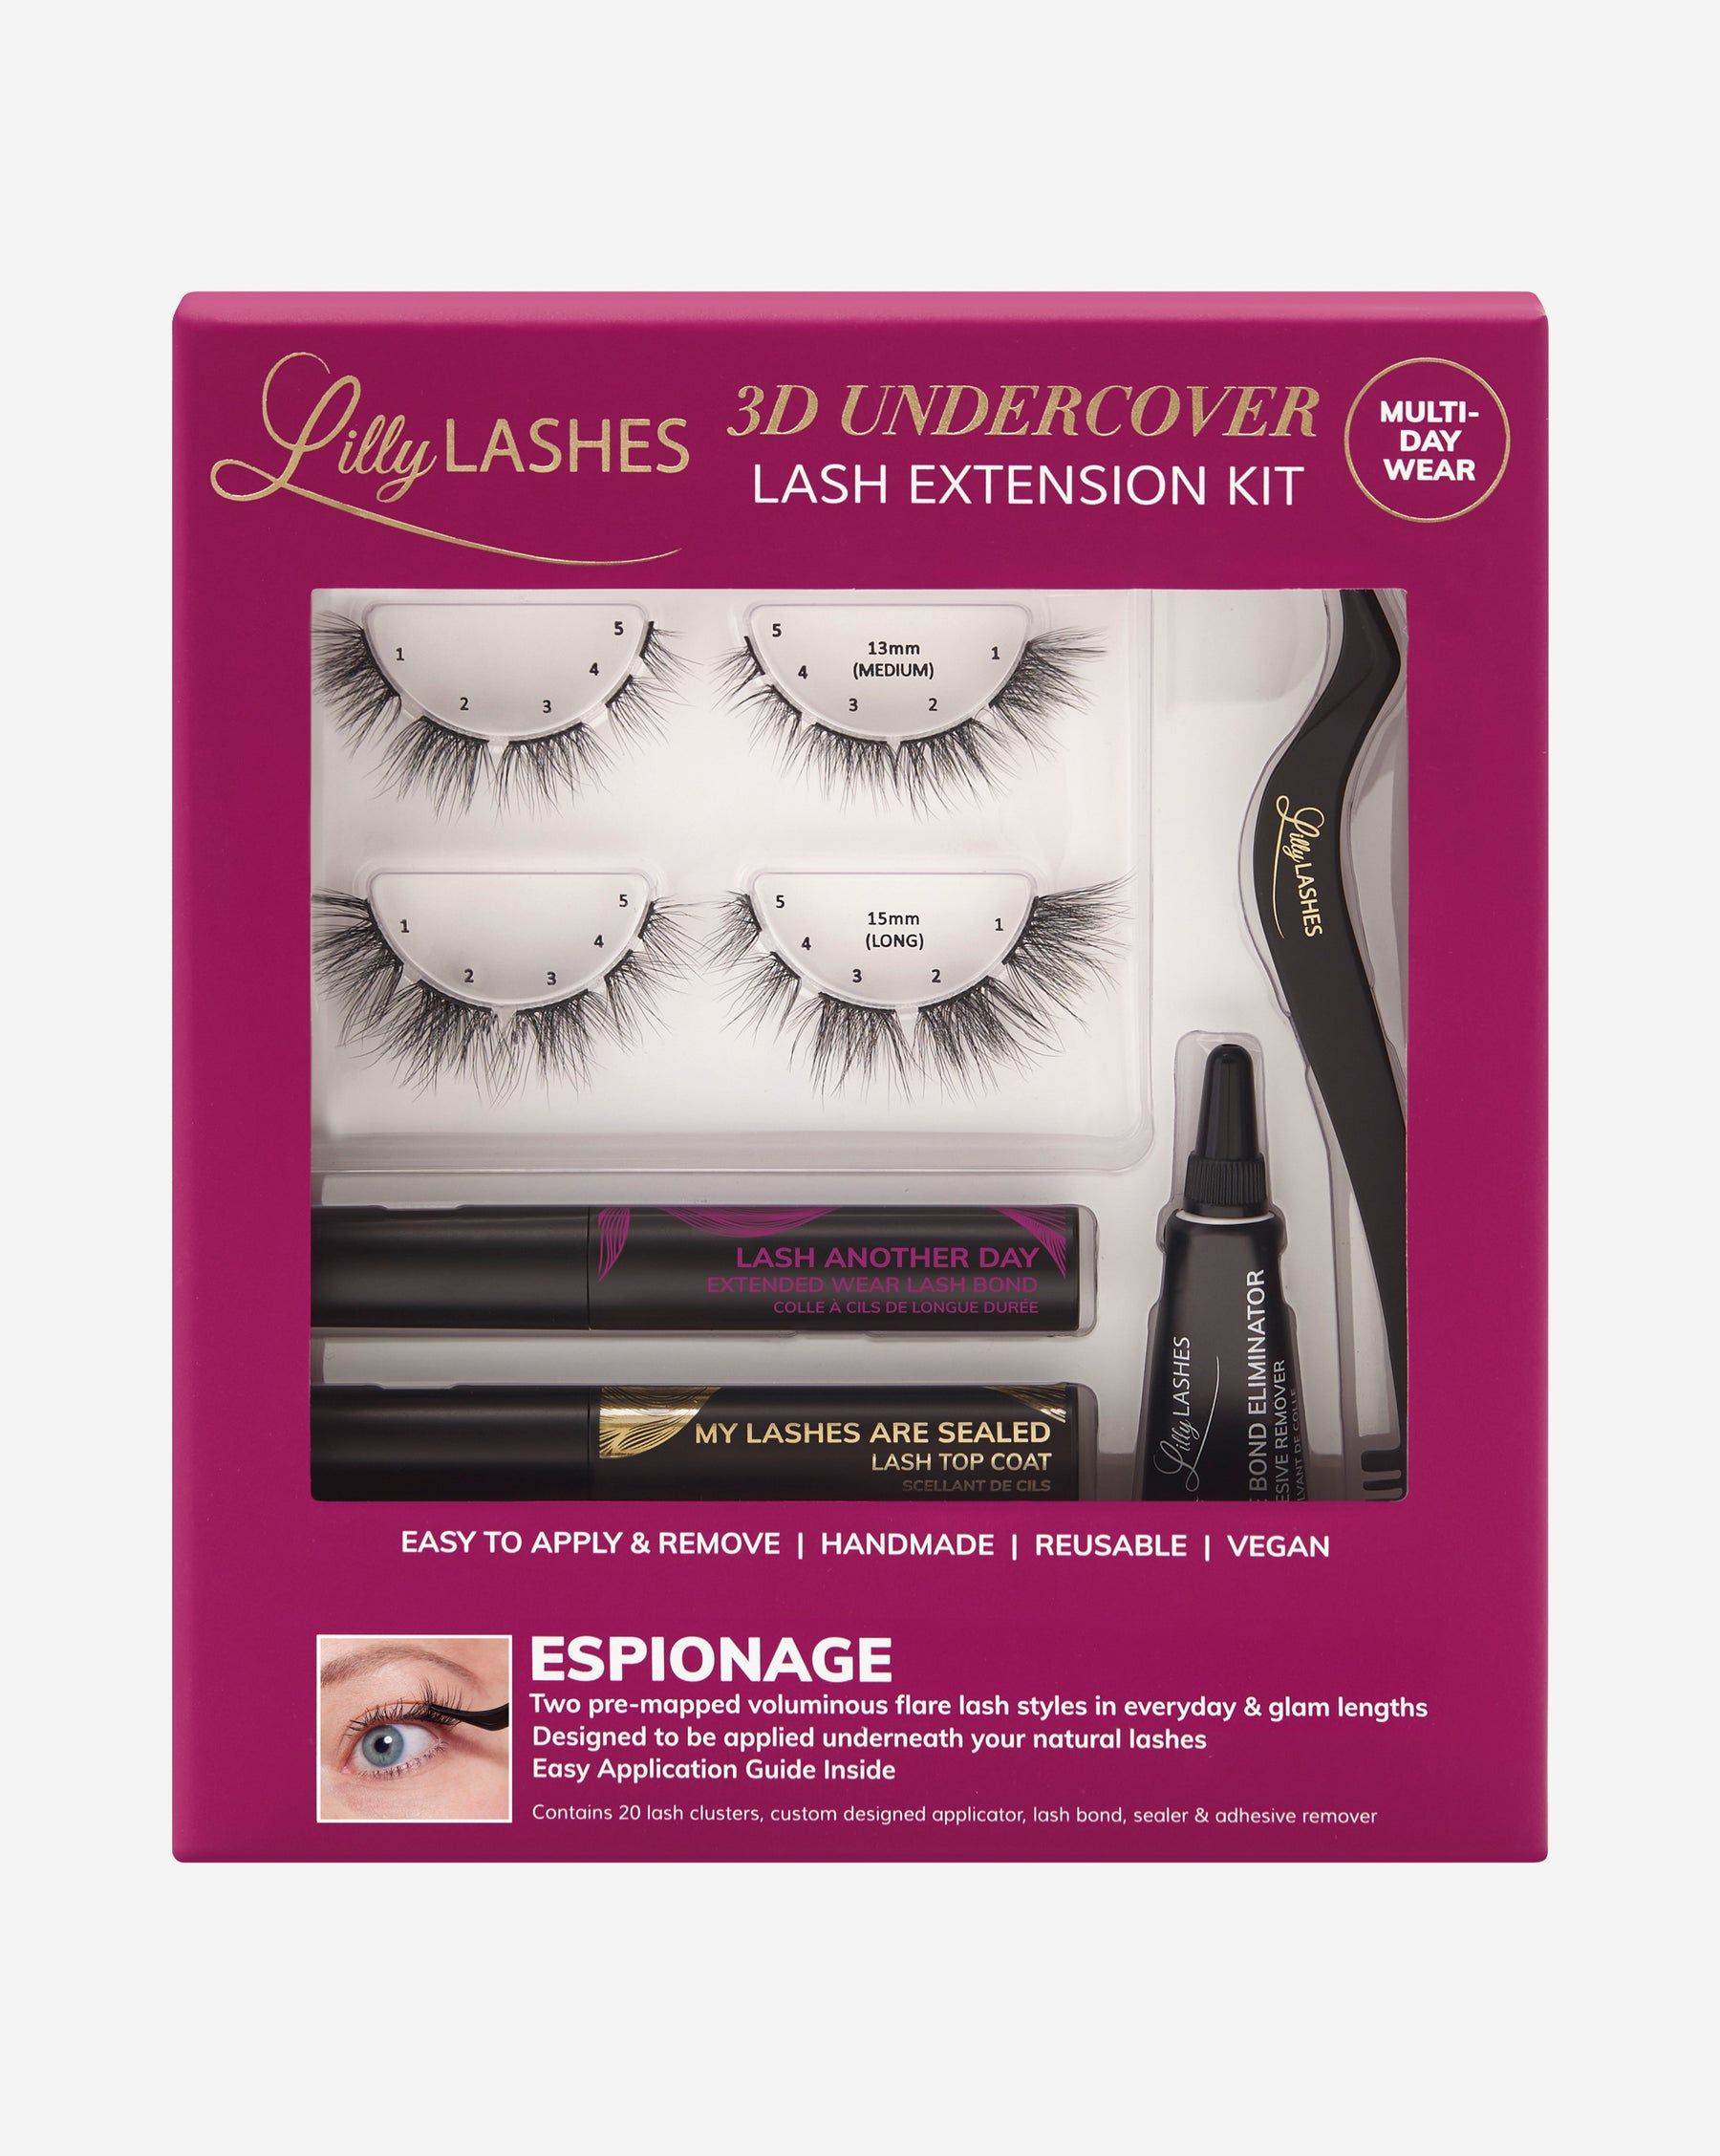 Espionage 3D Undercover Lash System | Lilly Lashes